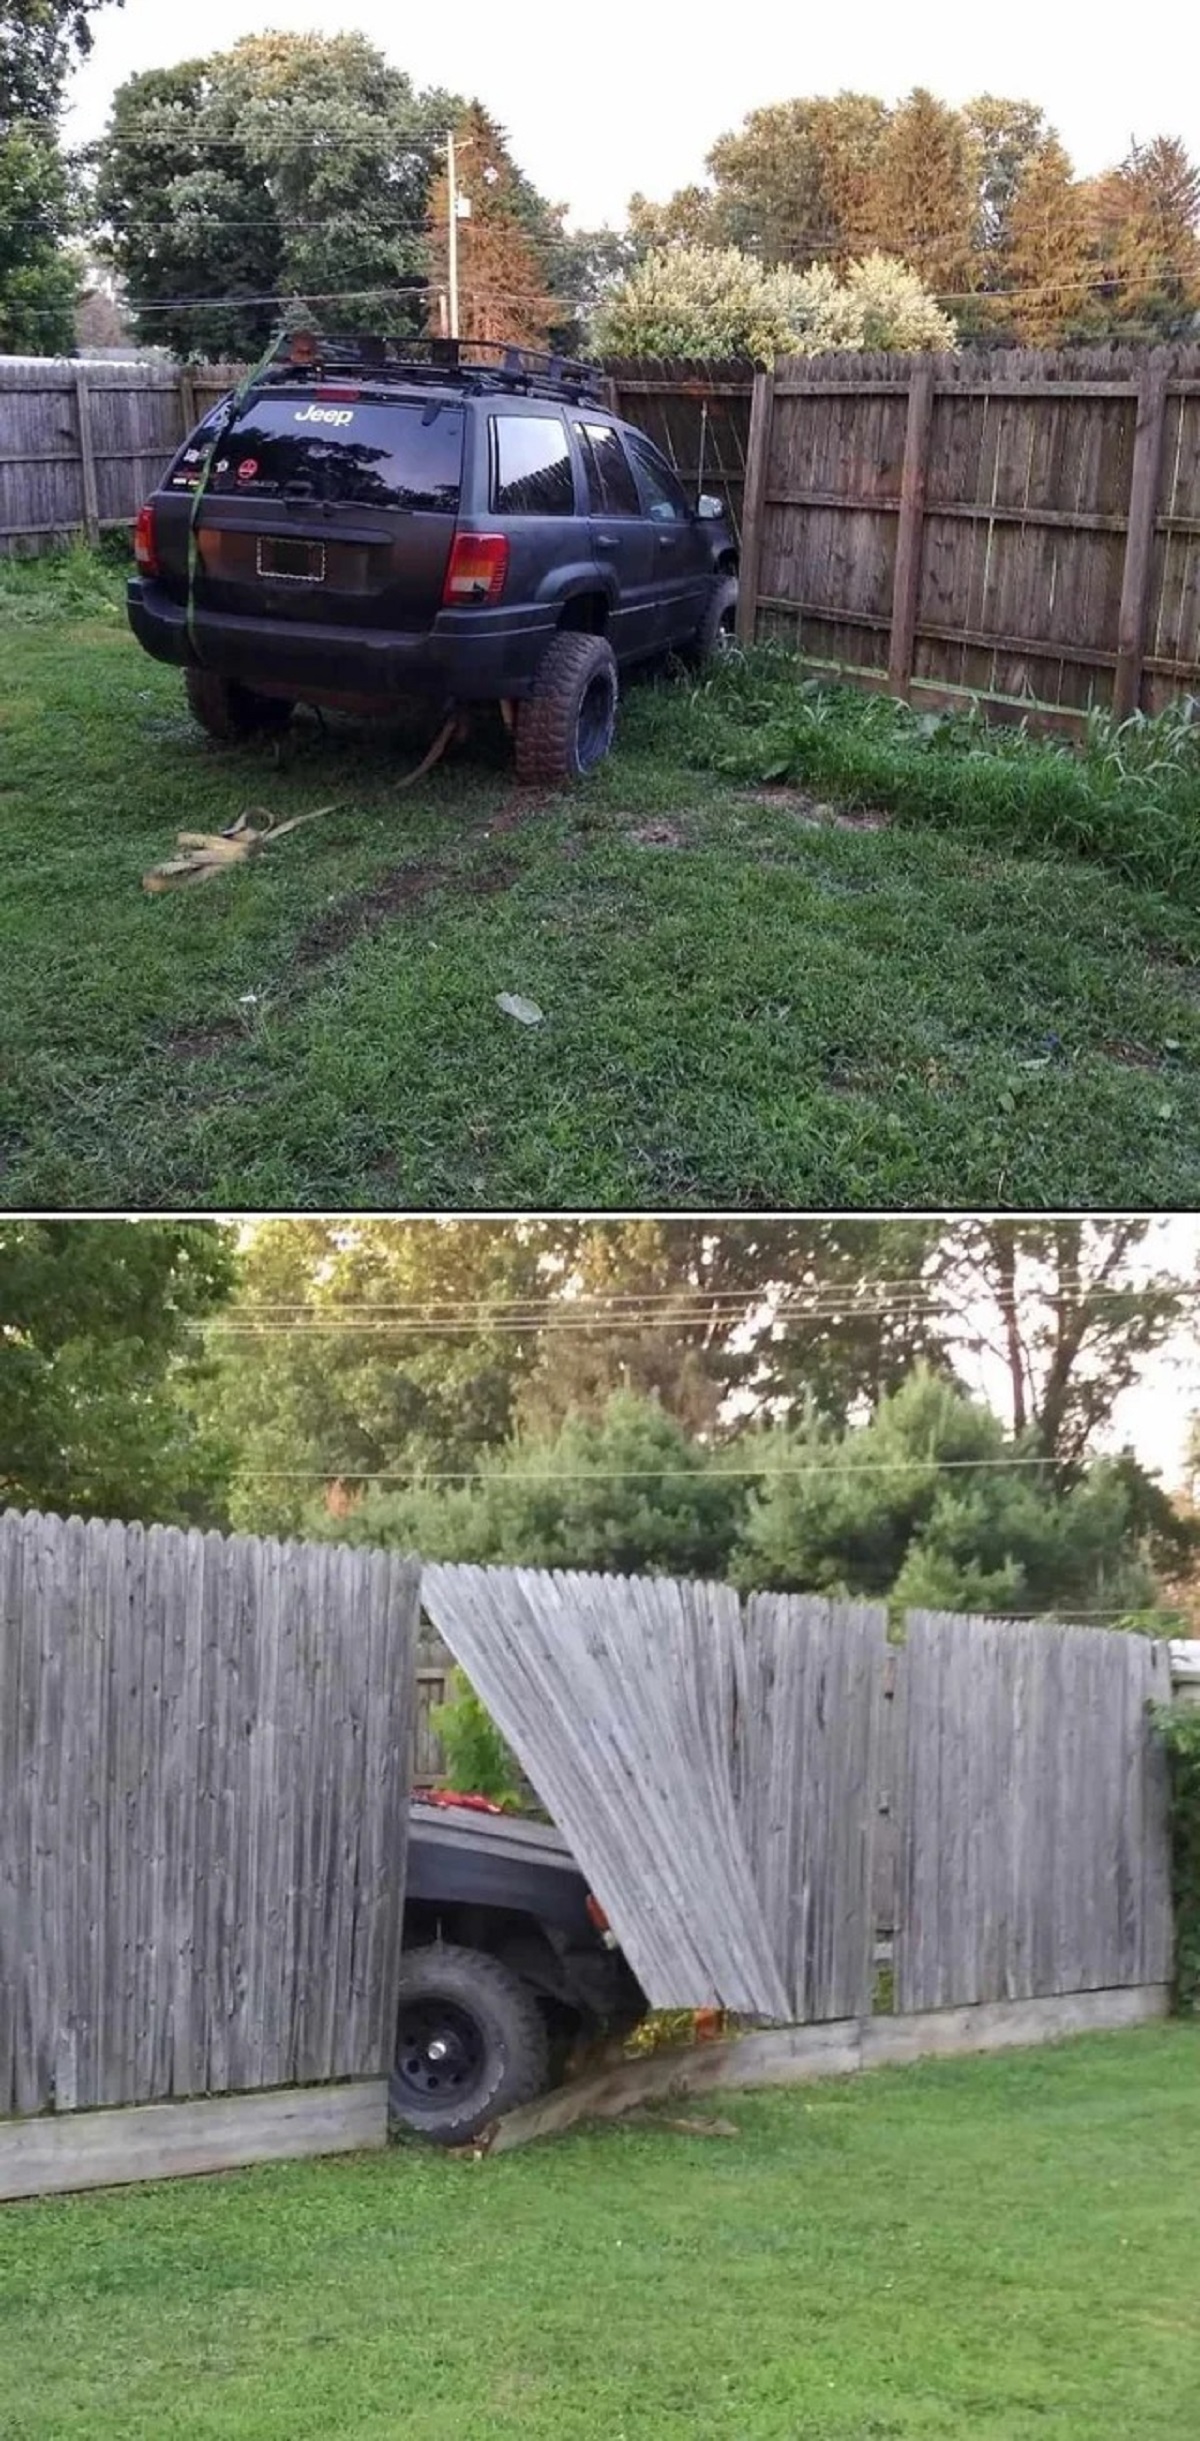 My 15-year-old son decided to move his sister's Jeep behind the garage to make room for another vehicle, but he “forgot” it had no brakes. So, this happened to my fence.